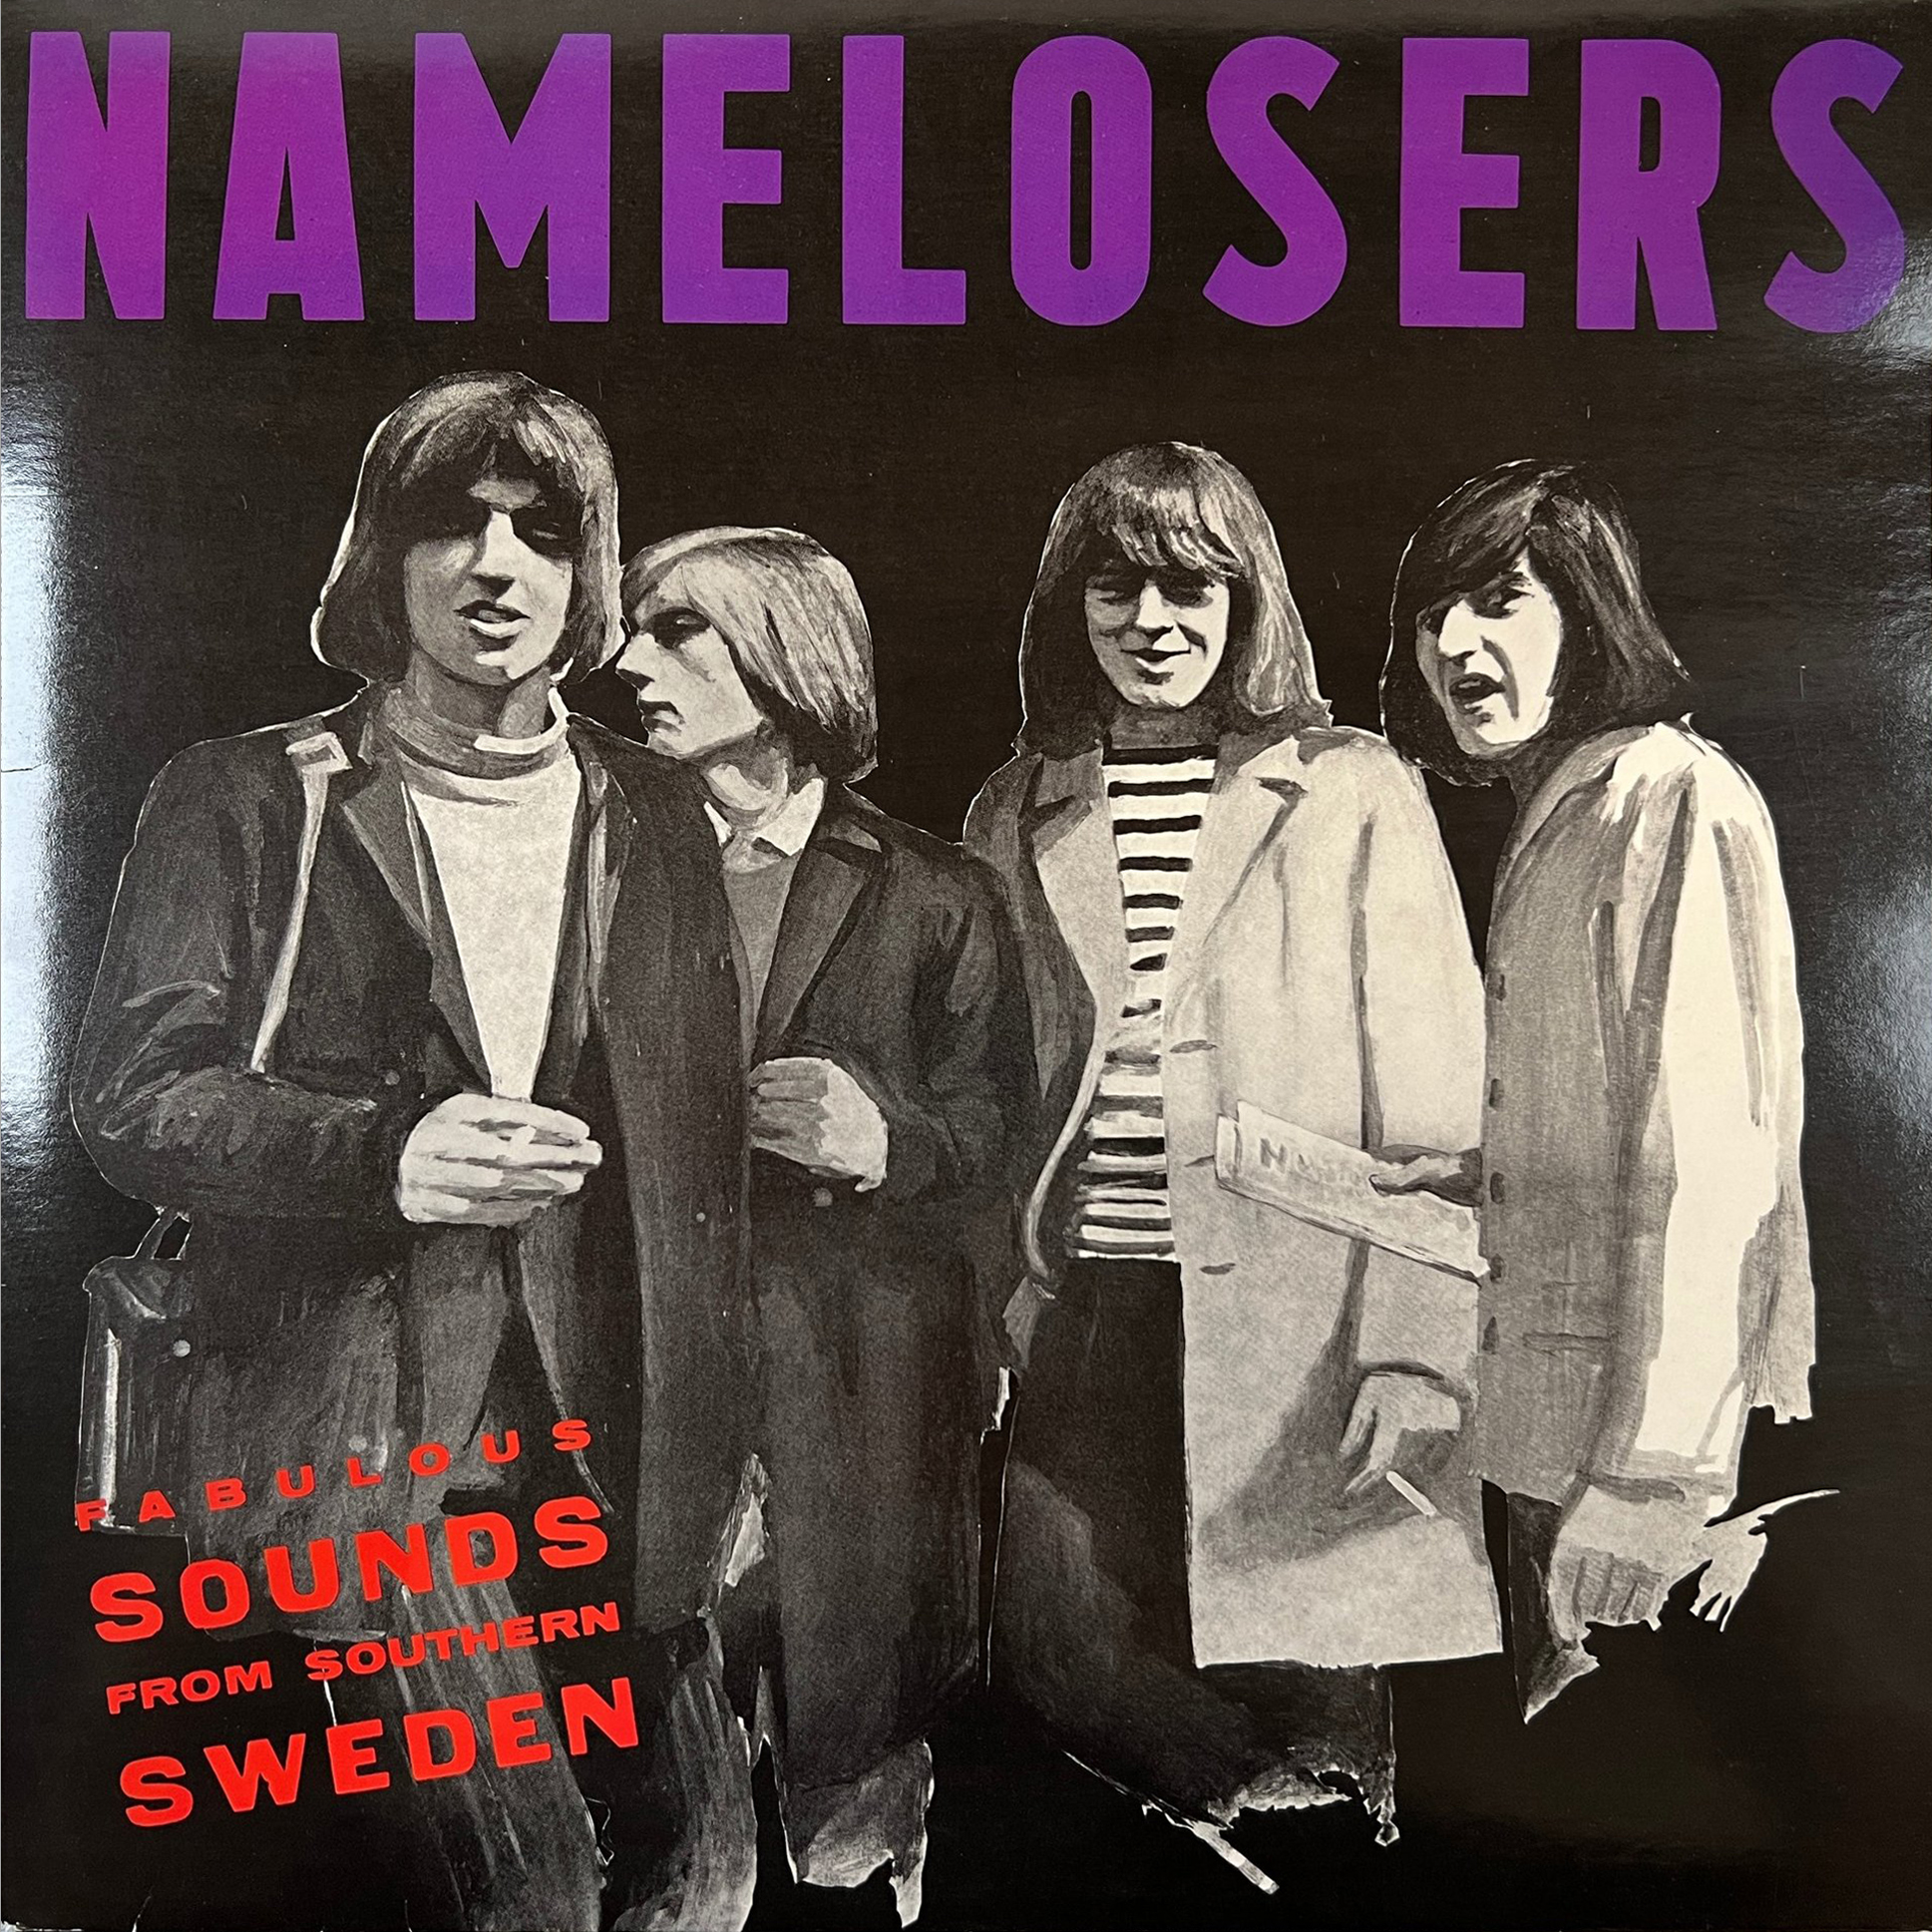 The Namelosers LP 1989